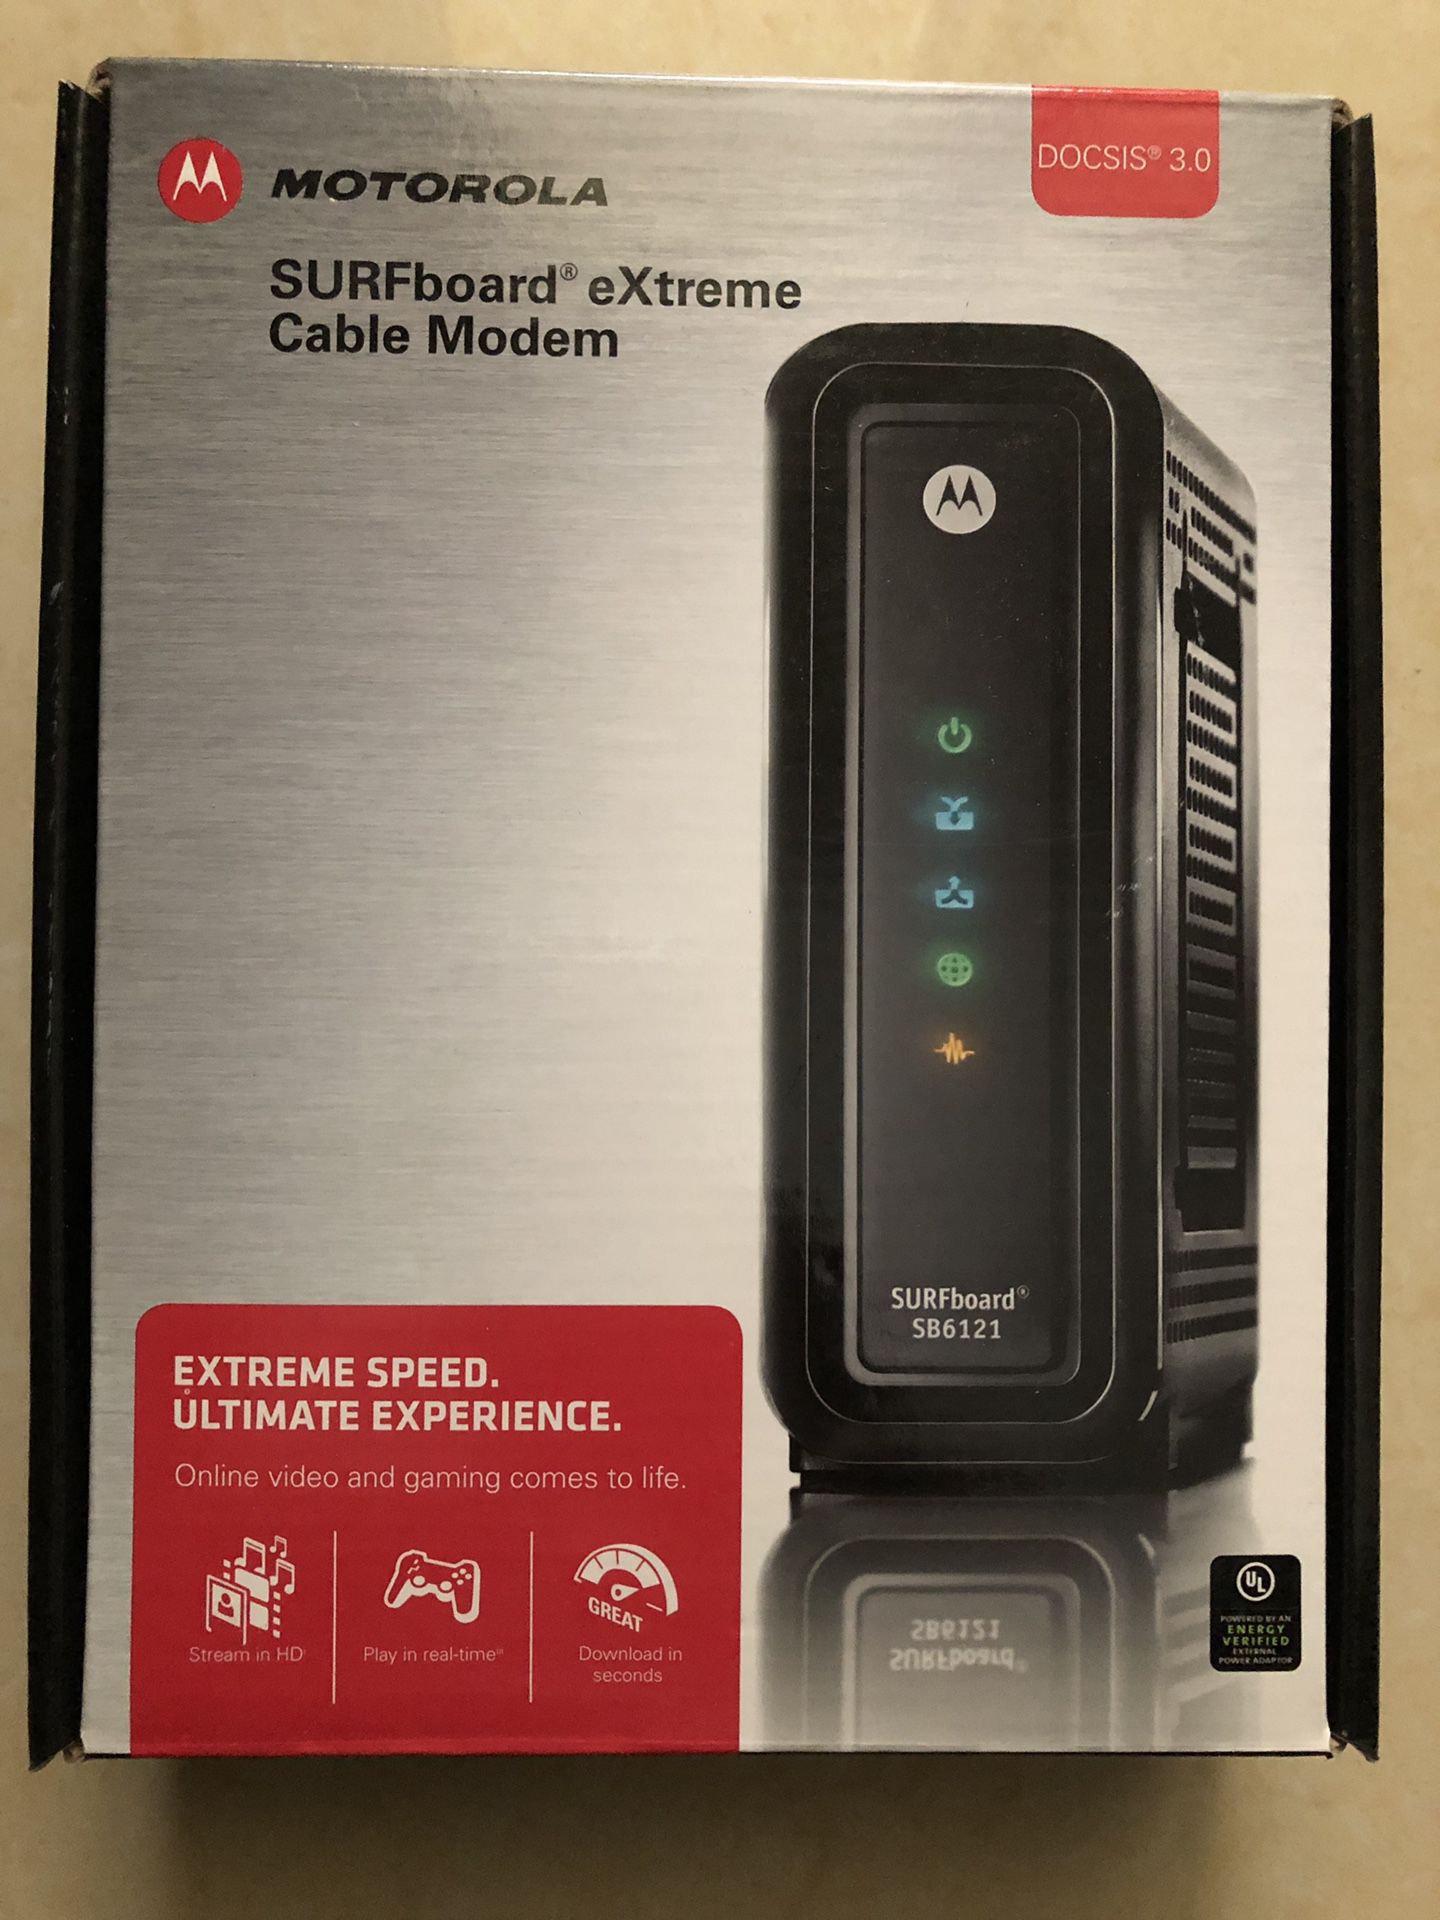 Motorola SURFboard eXtreme cable modem DOCIS 3.0